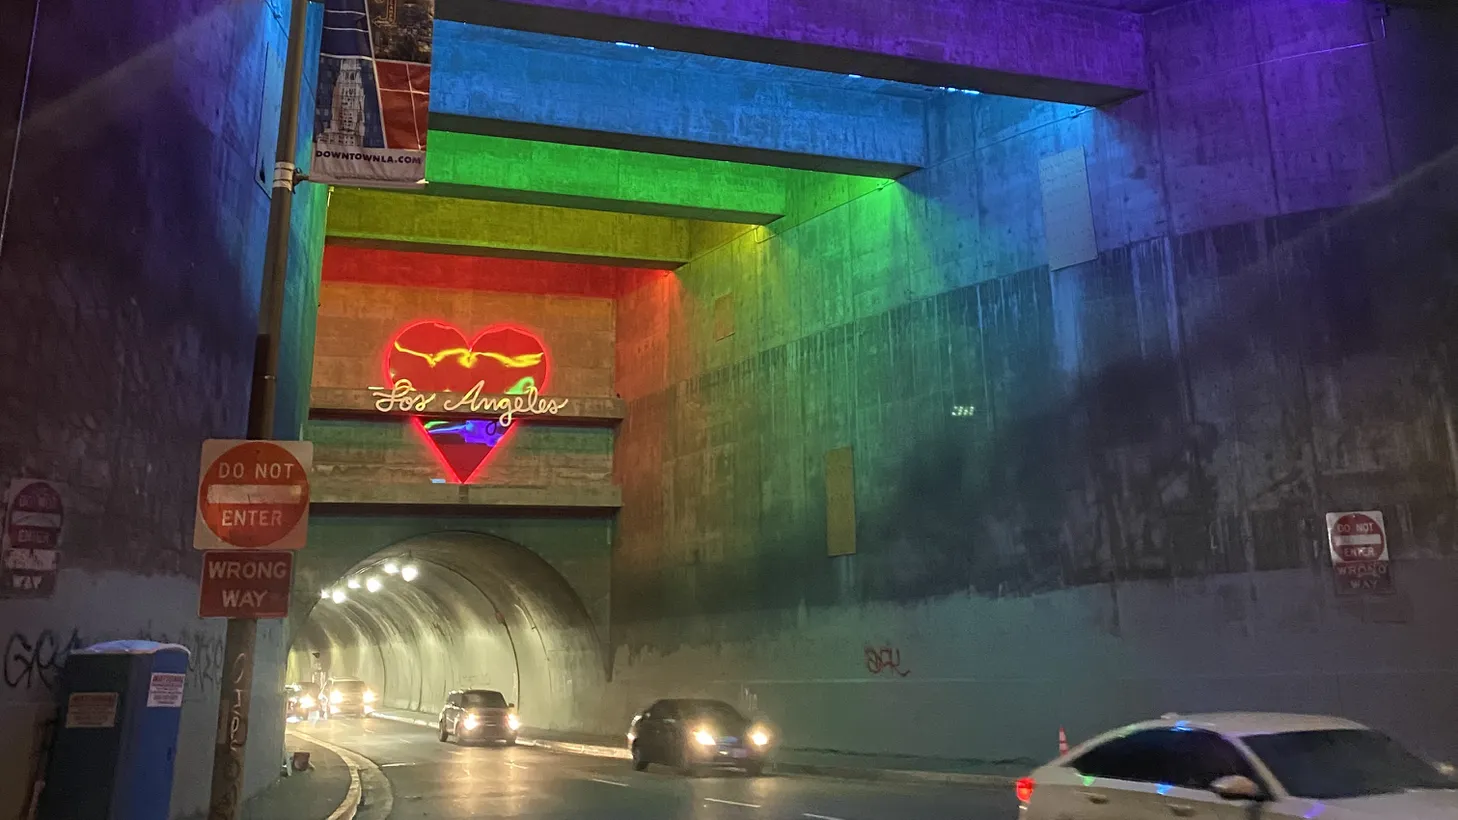 Tory DiPietro’s installation “The Light at the End of the Tunnel - Heart of Los Angeles” is now on display in DTLA.